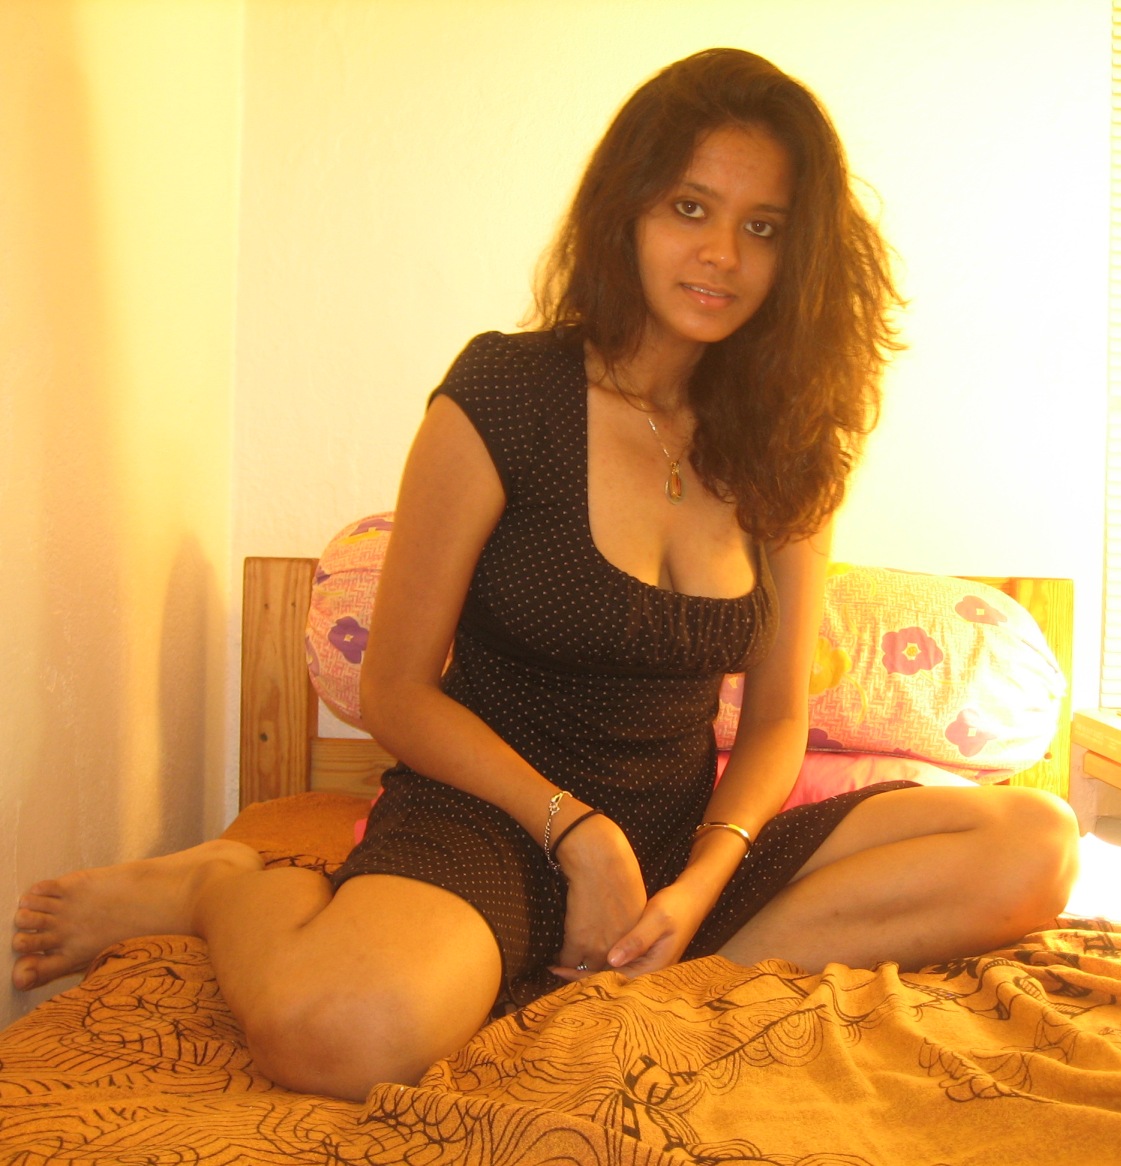 Very Hot Indian Girl Friend Showing Claveage In Photoshoot